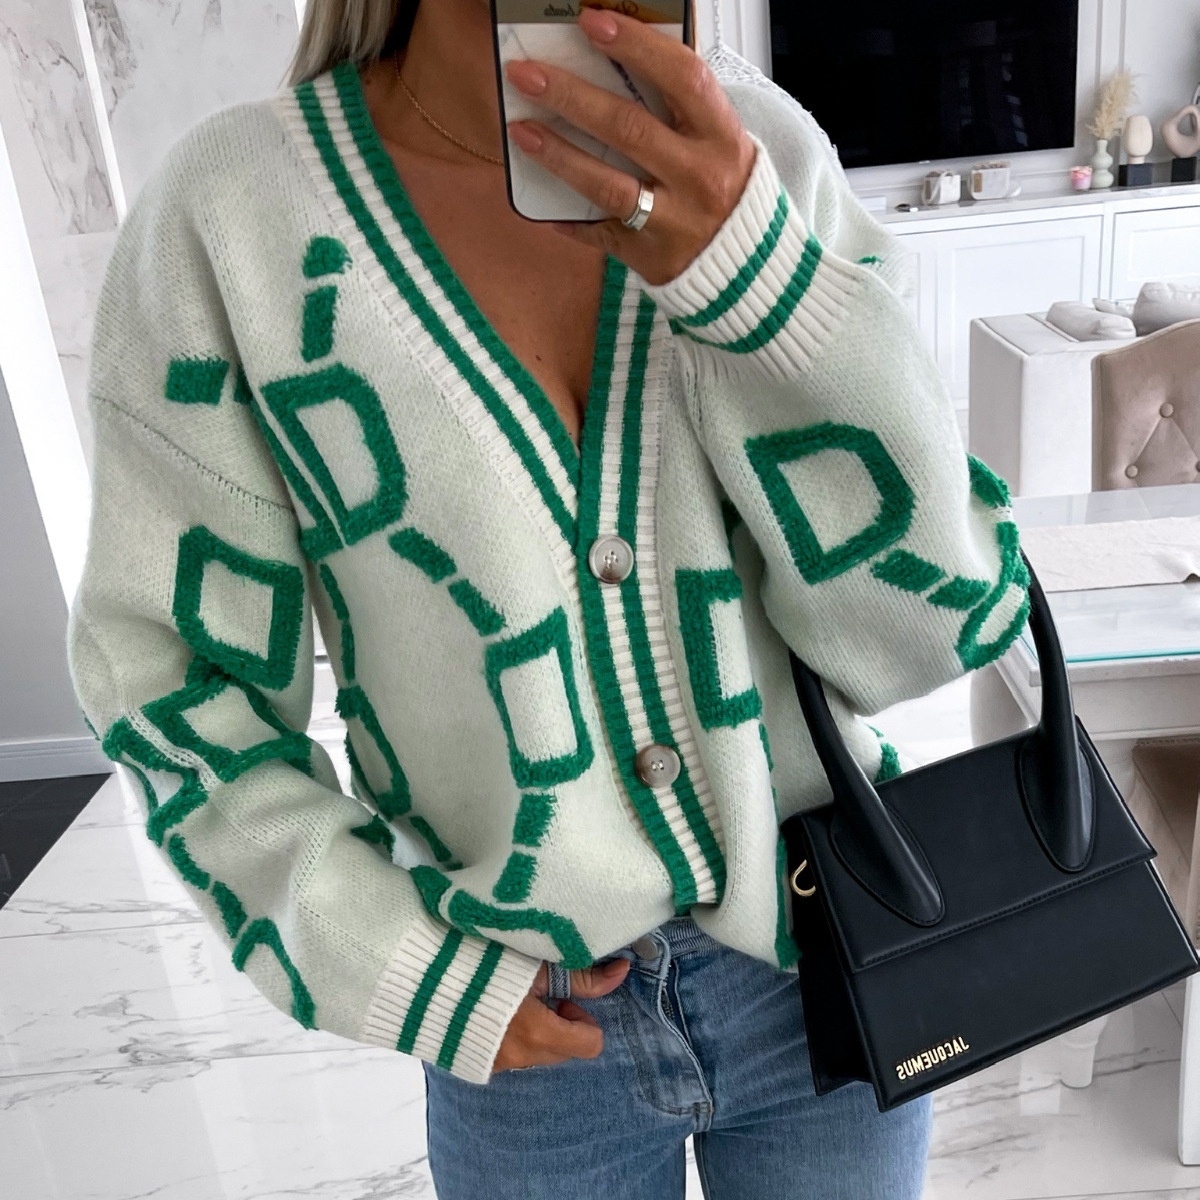 High Contrast Knit Cardigan, V-Neck Button Up Cardigan Sweater, Casual Tops For Fall & Winter, Women's Clothing - White, L